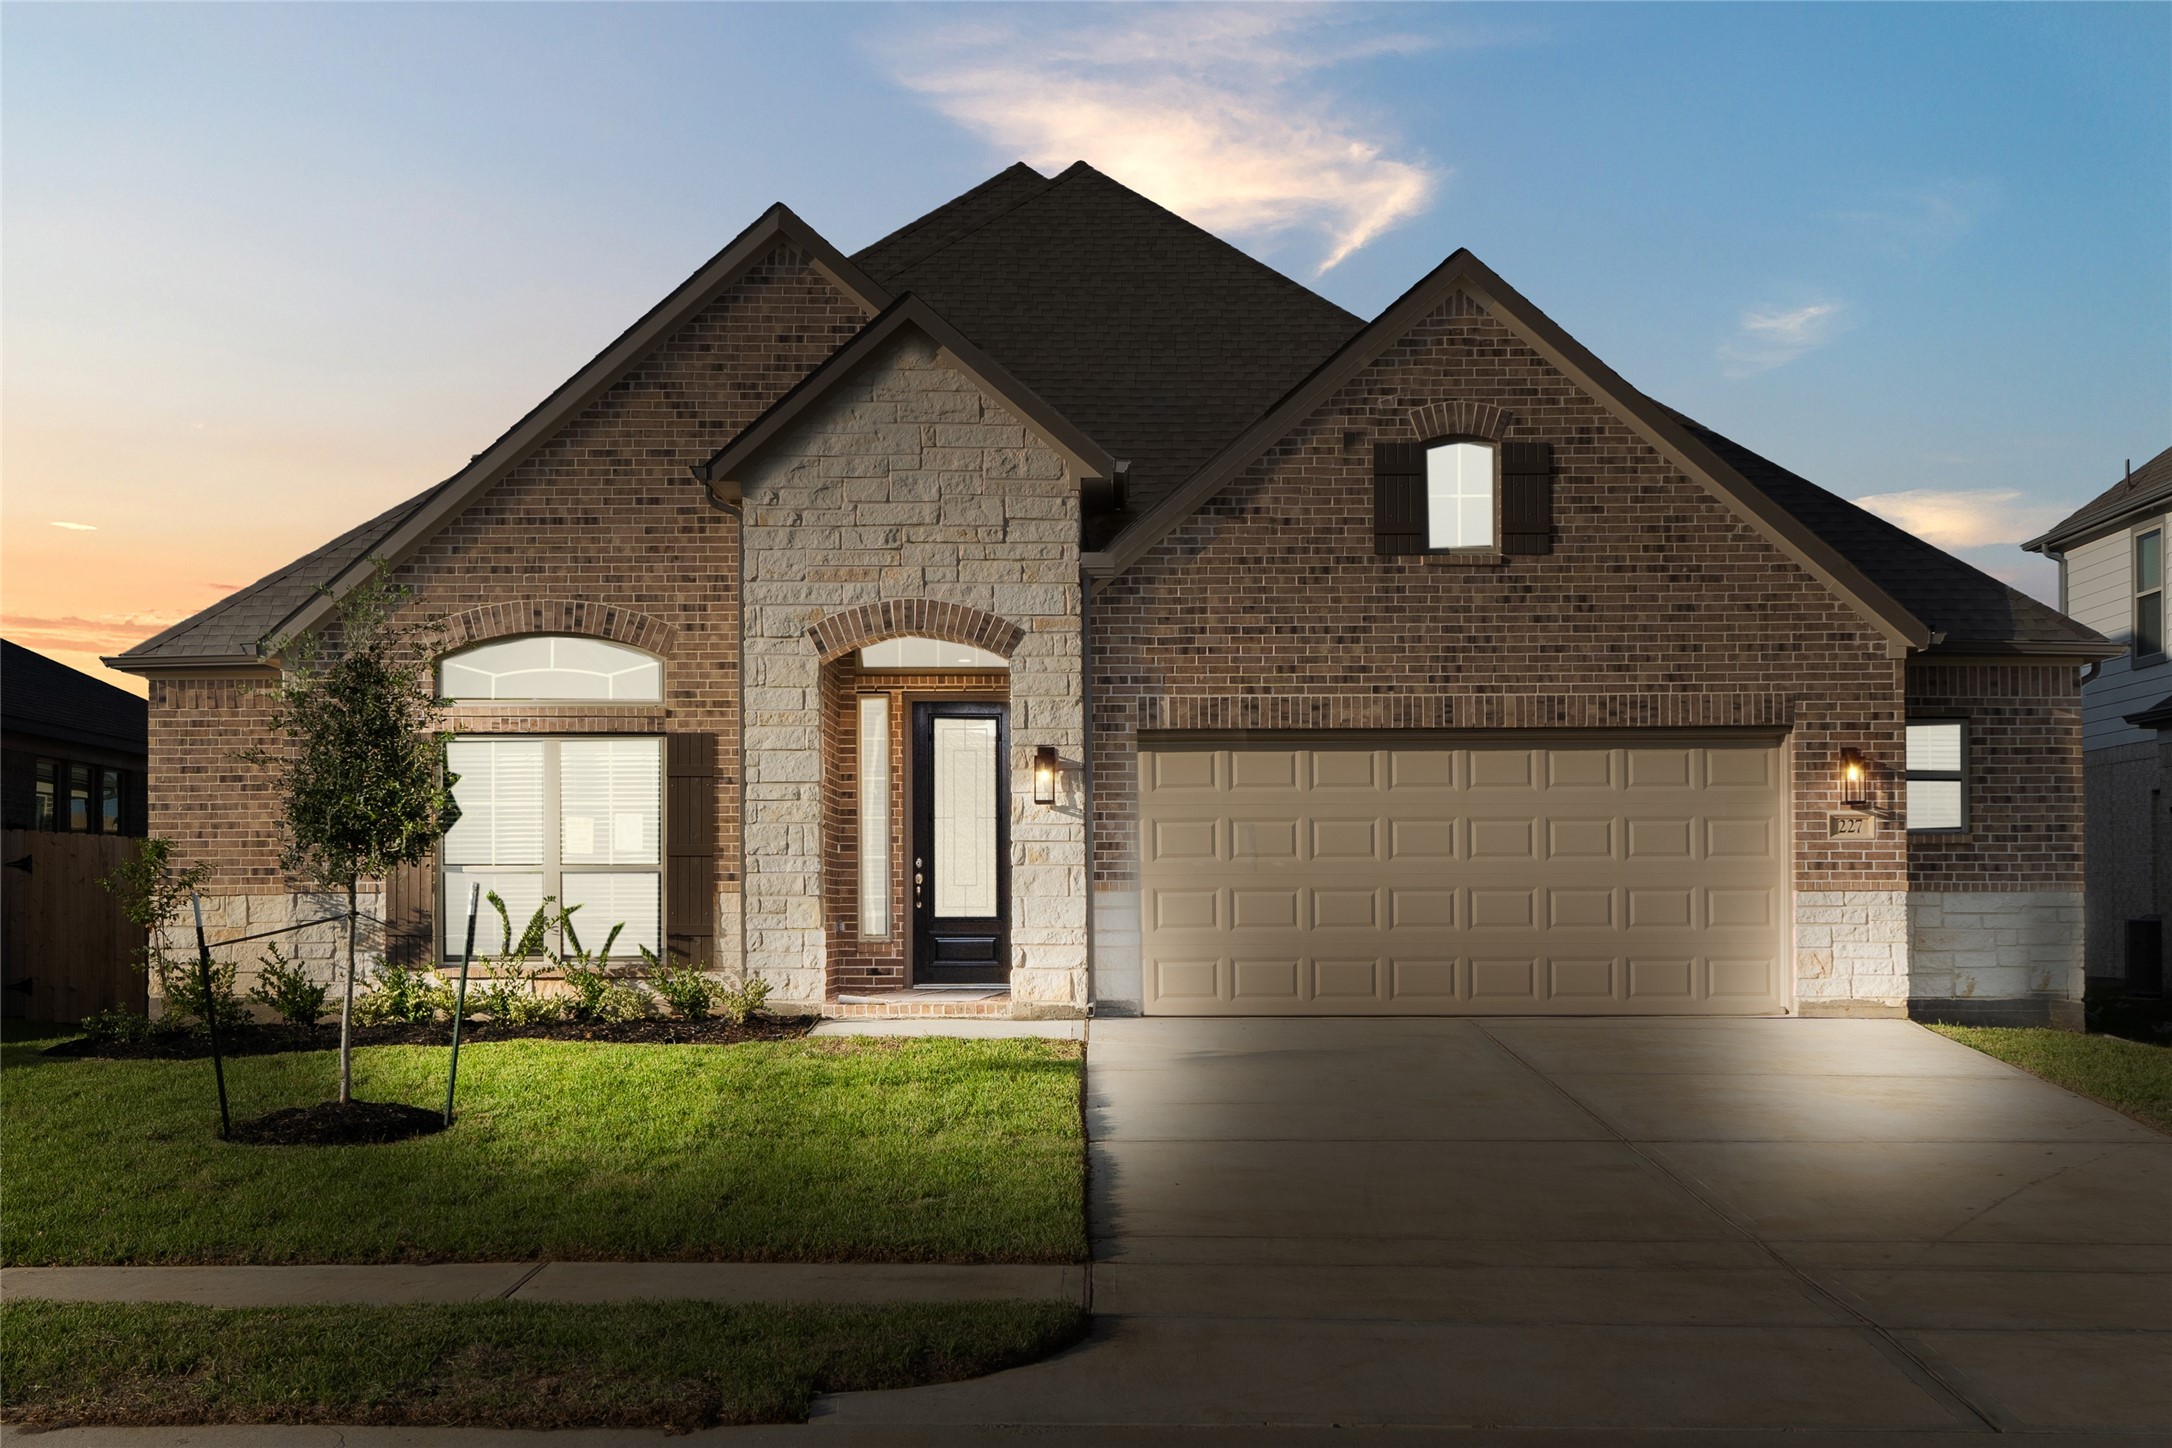 Welcome home to 227 Upland Drive located in Beacon Hill and zoned to Waller ISD!